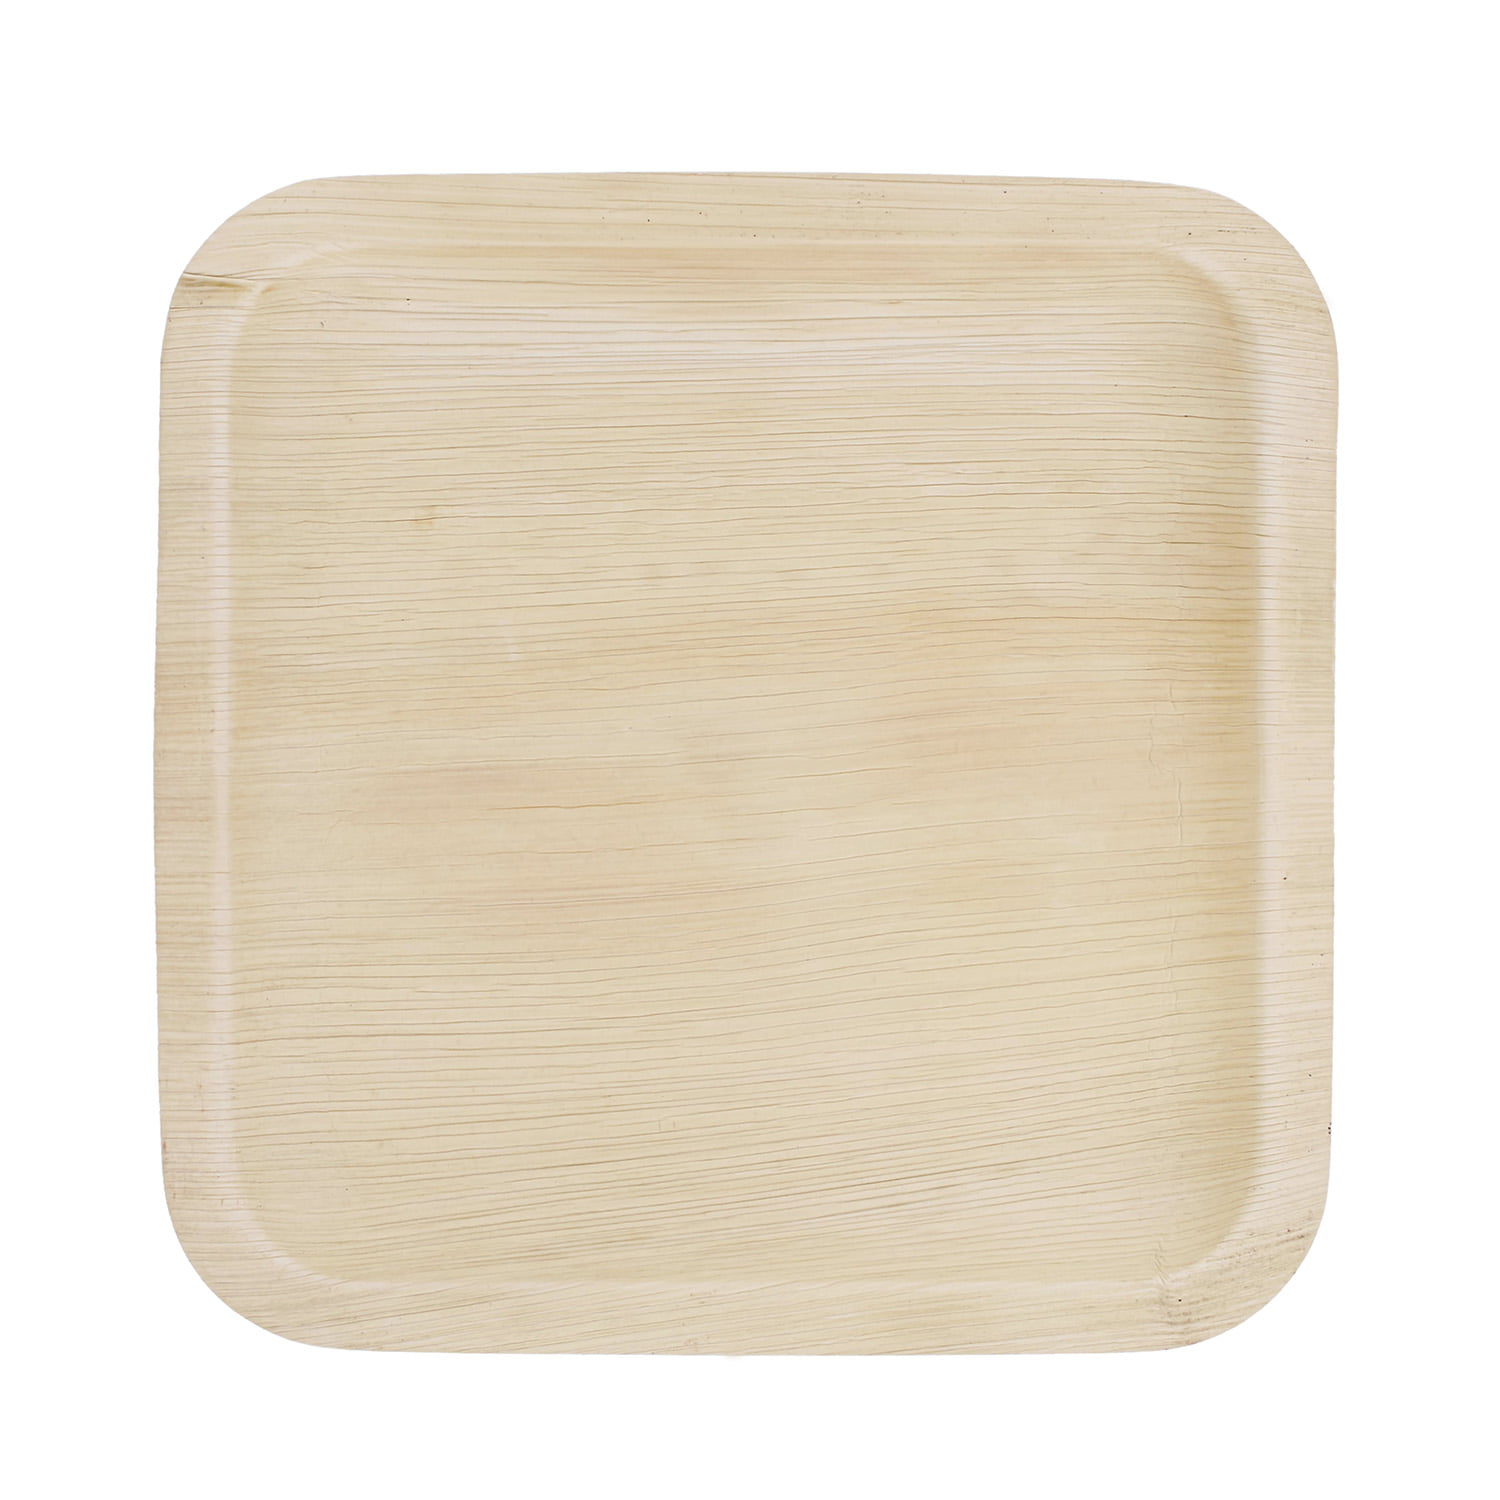 Spec101 Palm Leaf Plates 25 Pack 10 Inch Square Biodegradable Party Plates 